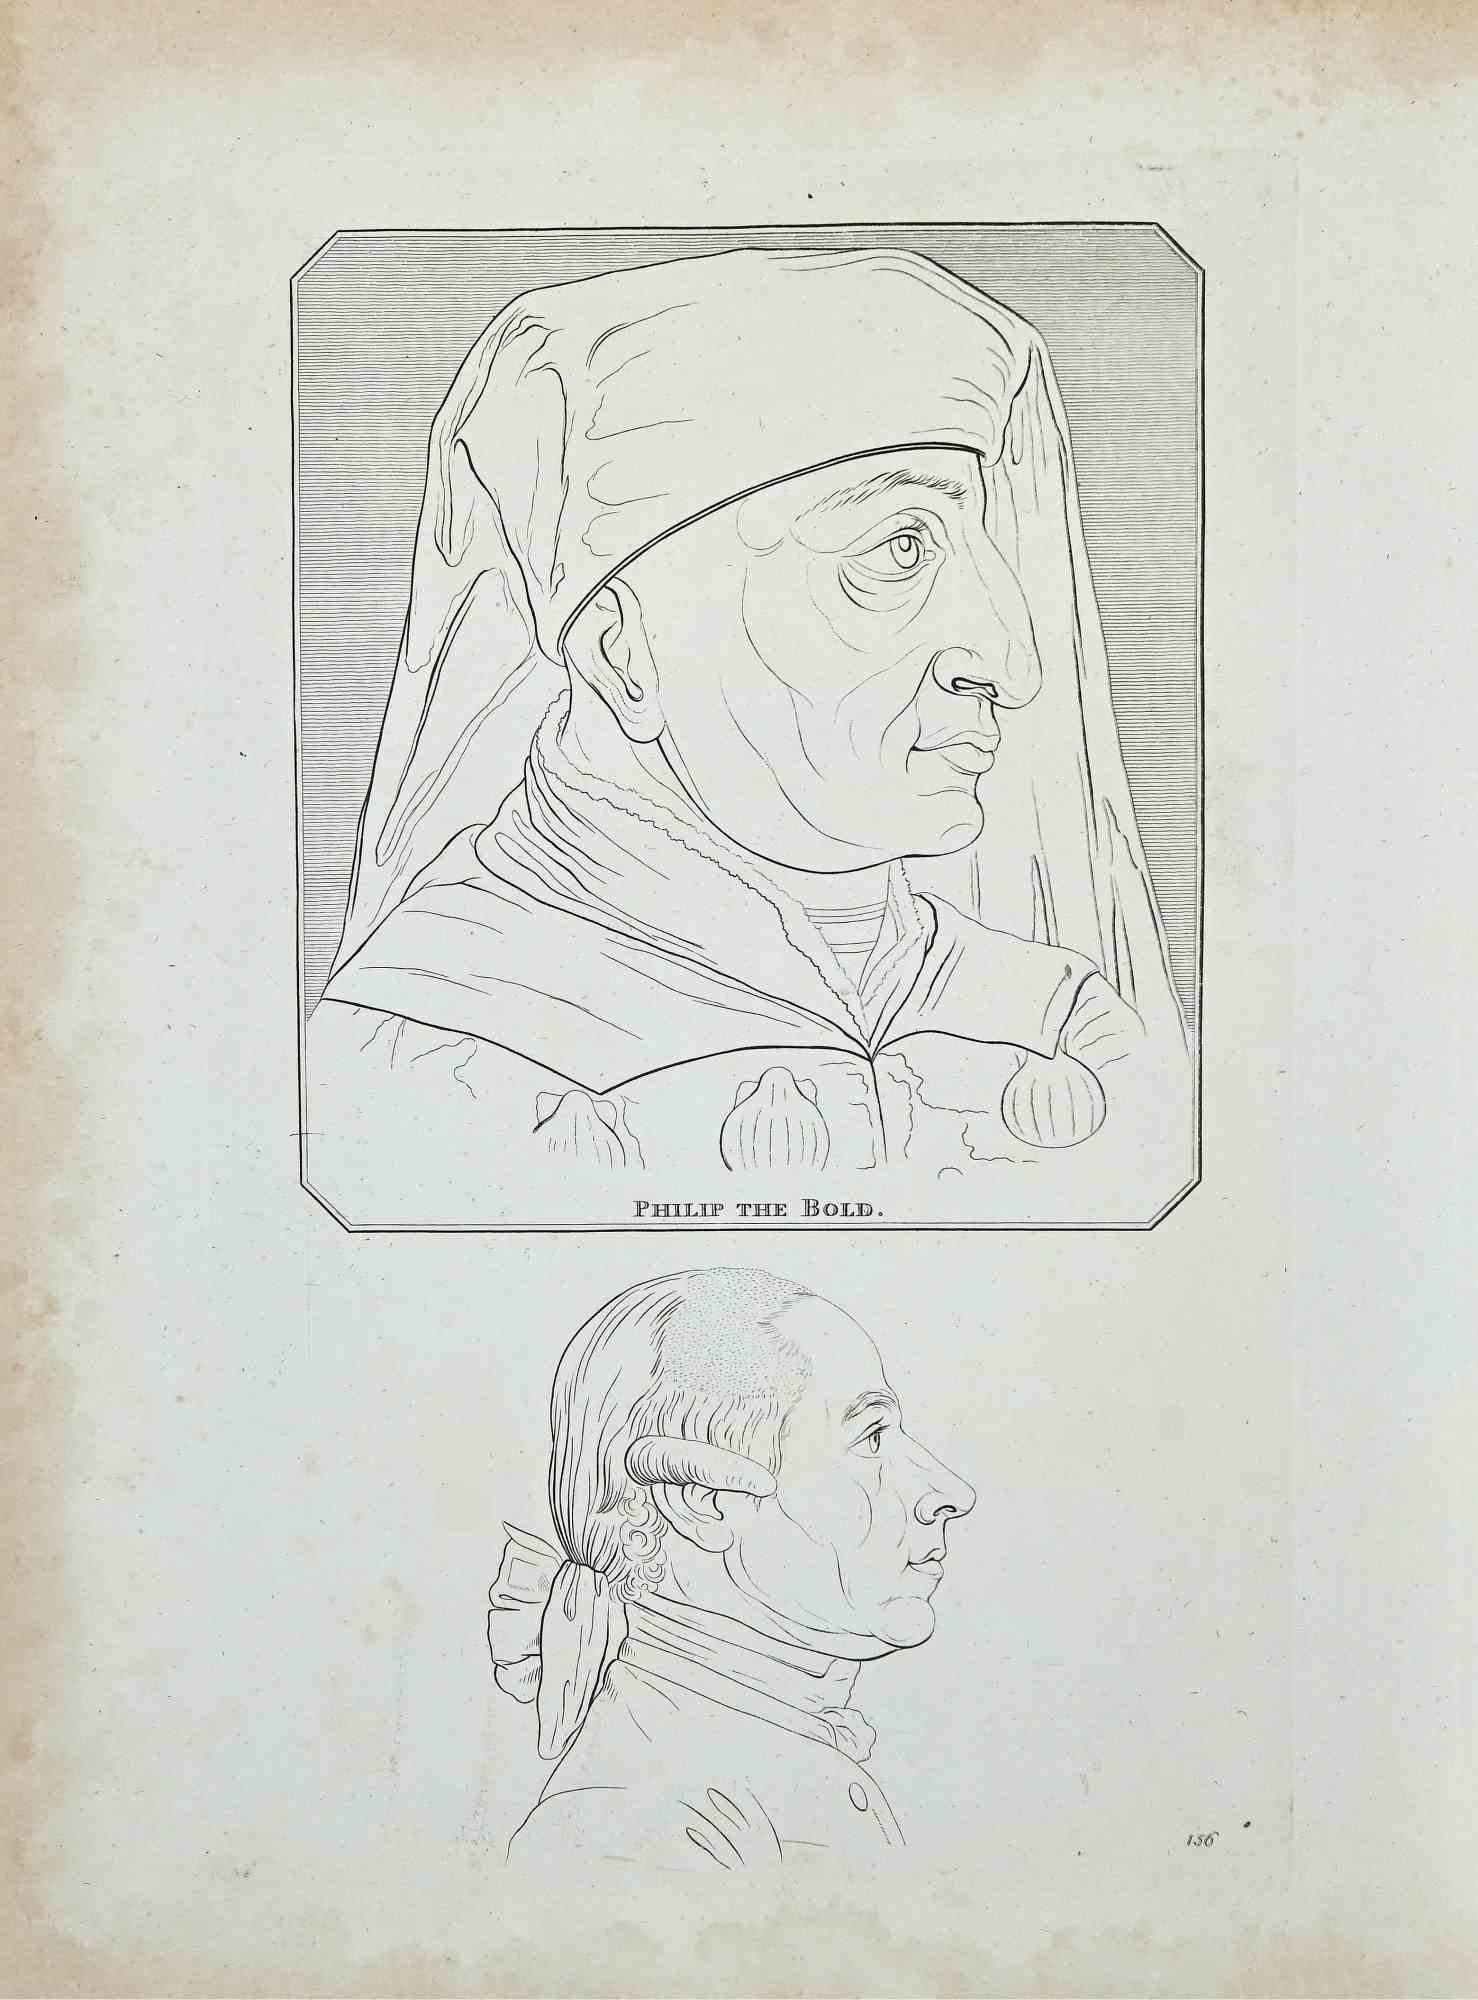 Portrait of Philip The Bold is an original etching artwork realized by Thomas Holloway for Johann Caspar Lavater's "Essays on Physiognomy, Designed to Promote the Knowledge and the Love of Mankind", London, Bensley, 1810. 

Good conditions with some